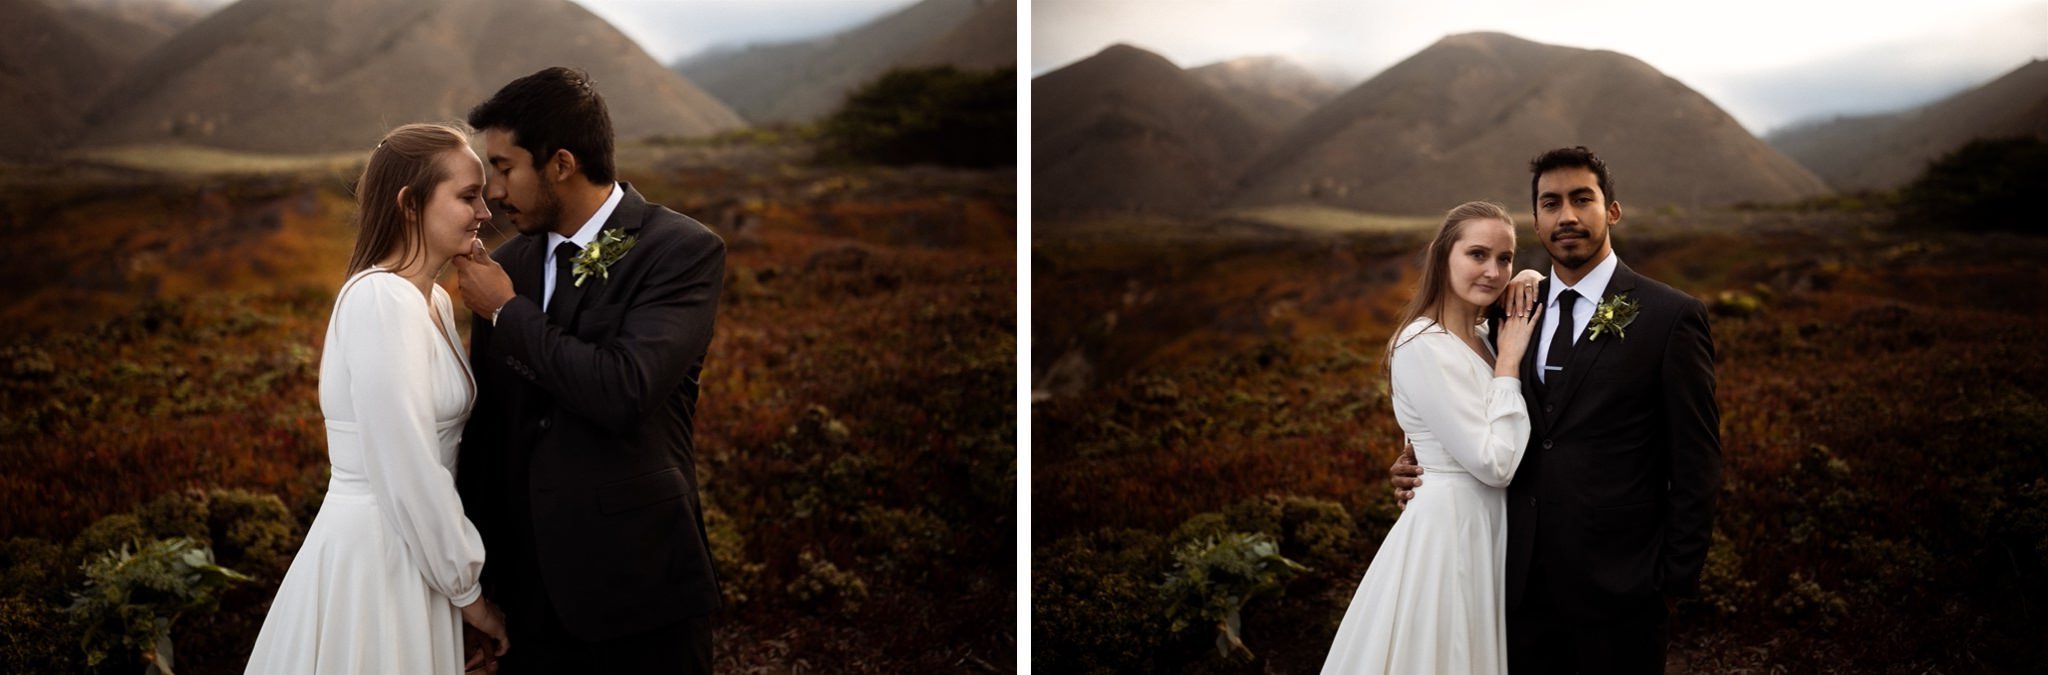 106_Two-Day Big Sur Redwoods Elopement with Family_Will Khoury Elopement Photographer.jpg